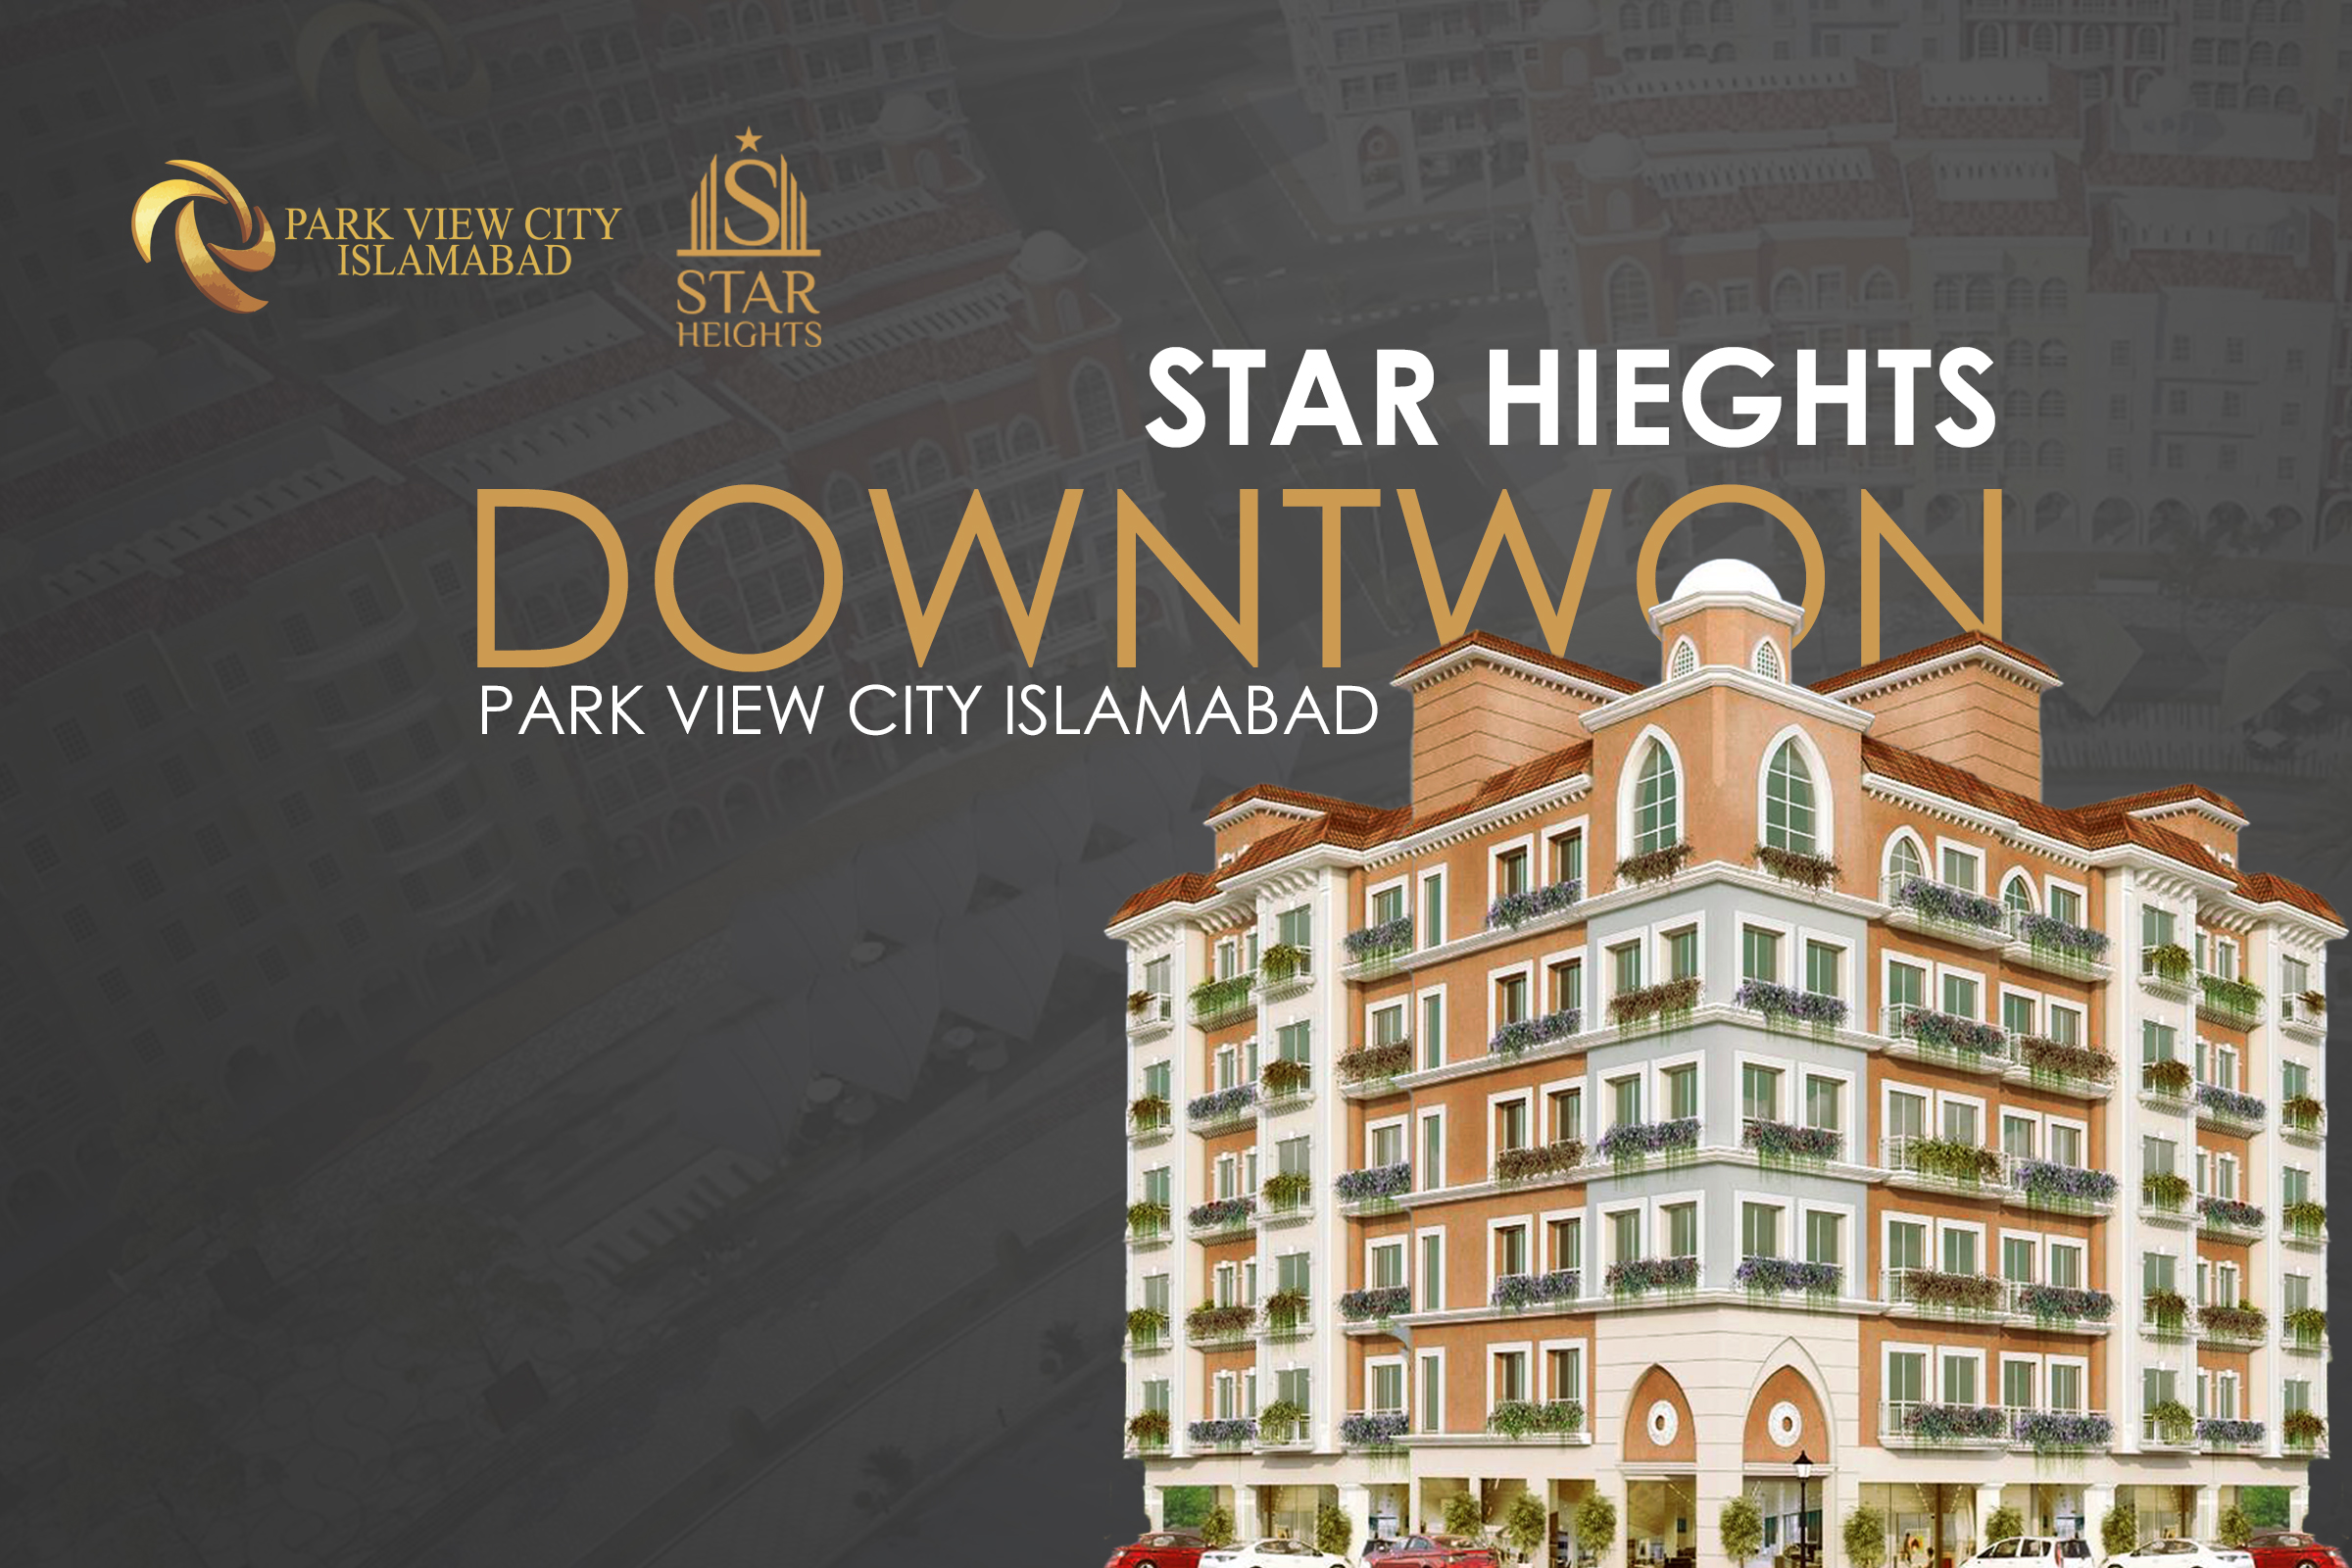 Star Heights Down Town Park View City